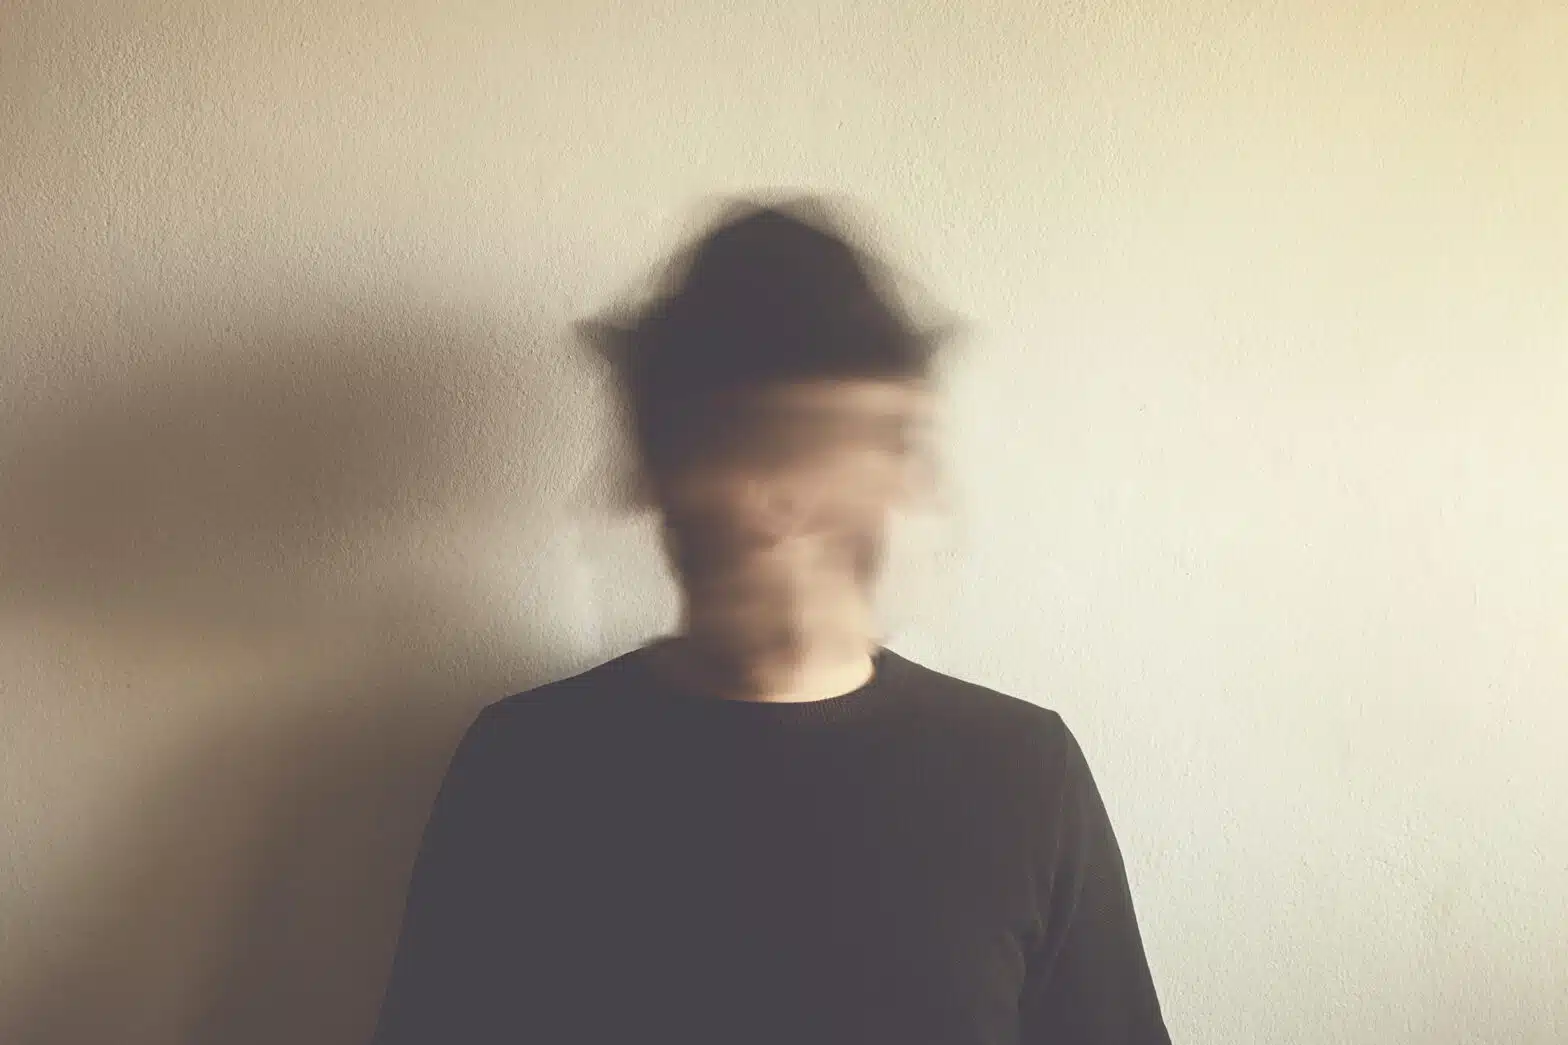 A man stands alone, his face and head is highly blurred -Schizophrenia Overview & Treatment